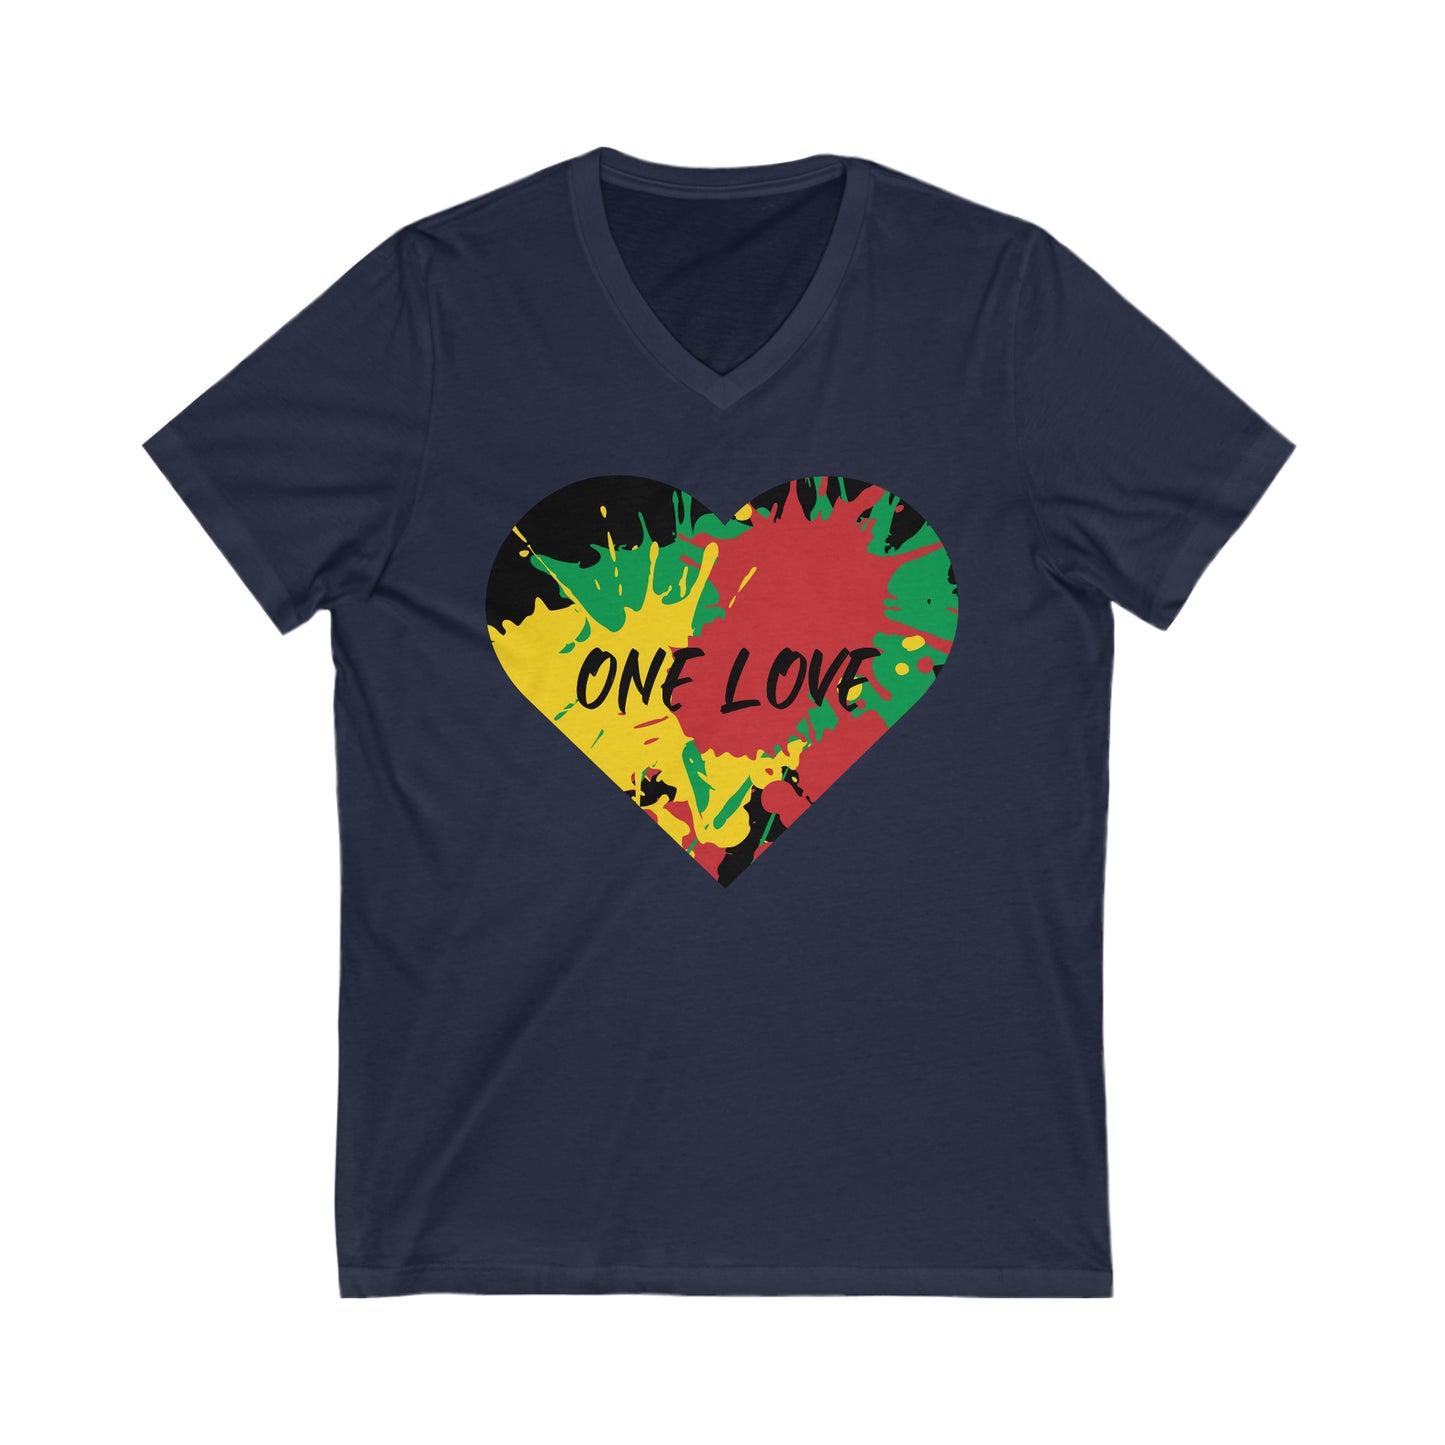 ONE LOVE RED GREEN AND GOLD HEART V NECK T SHIRT